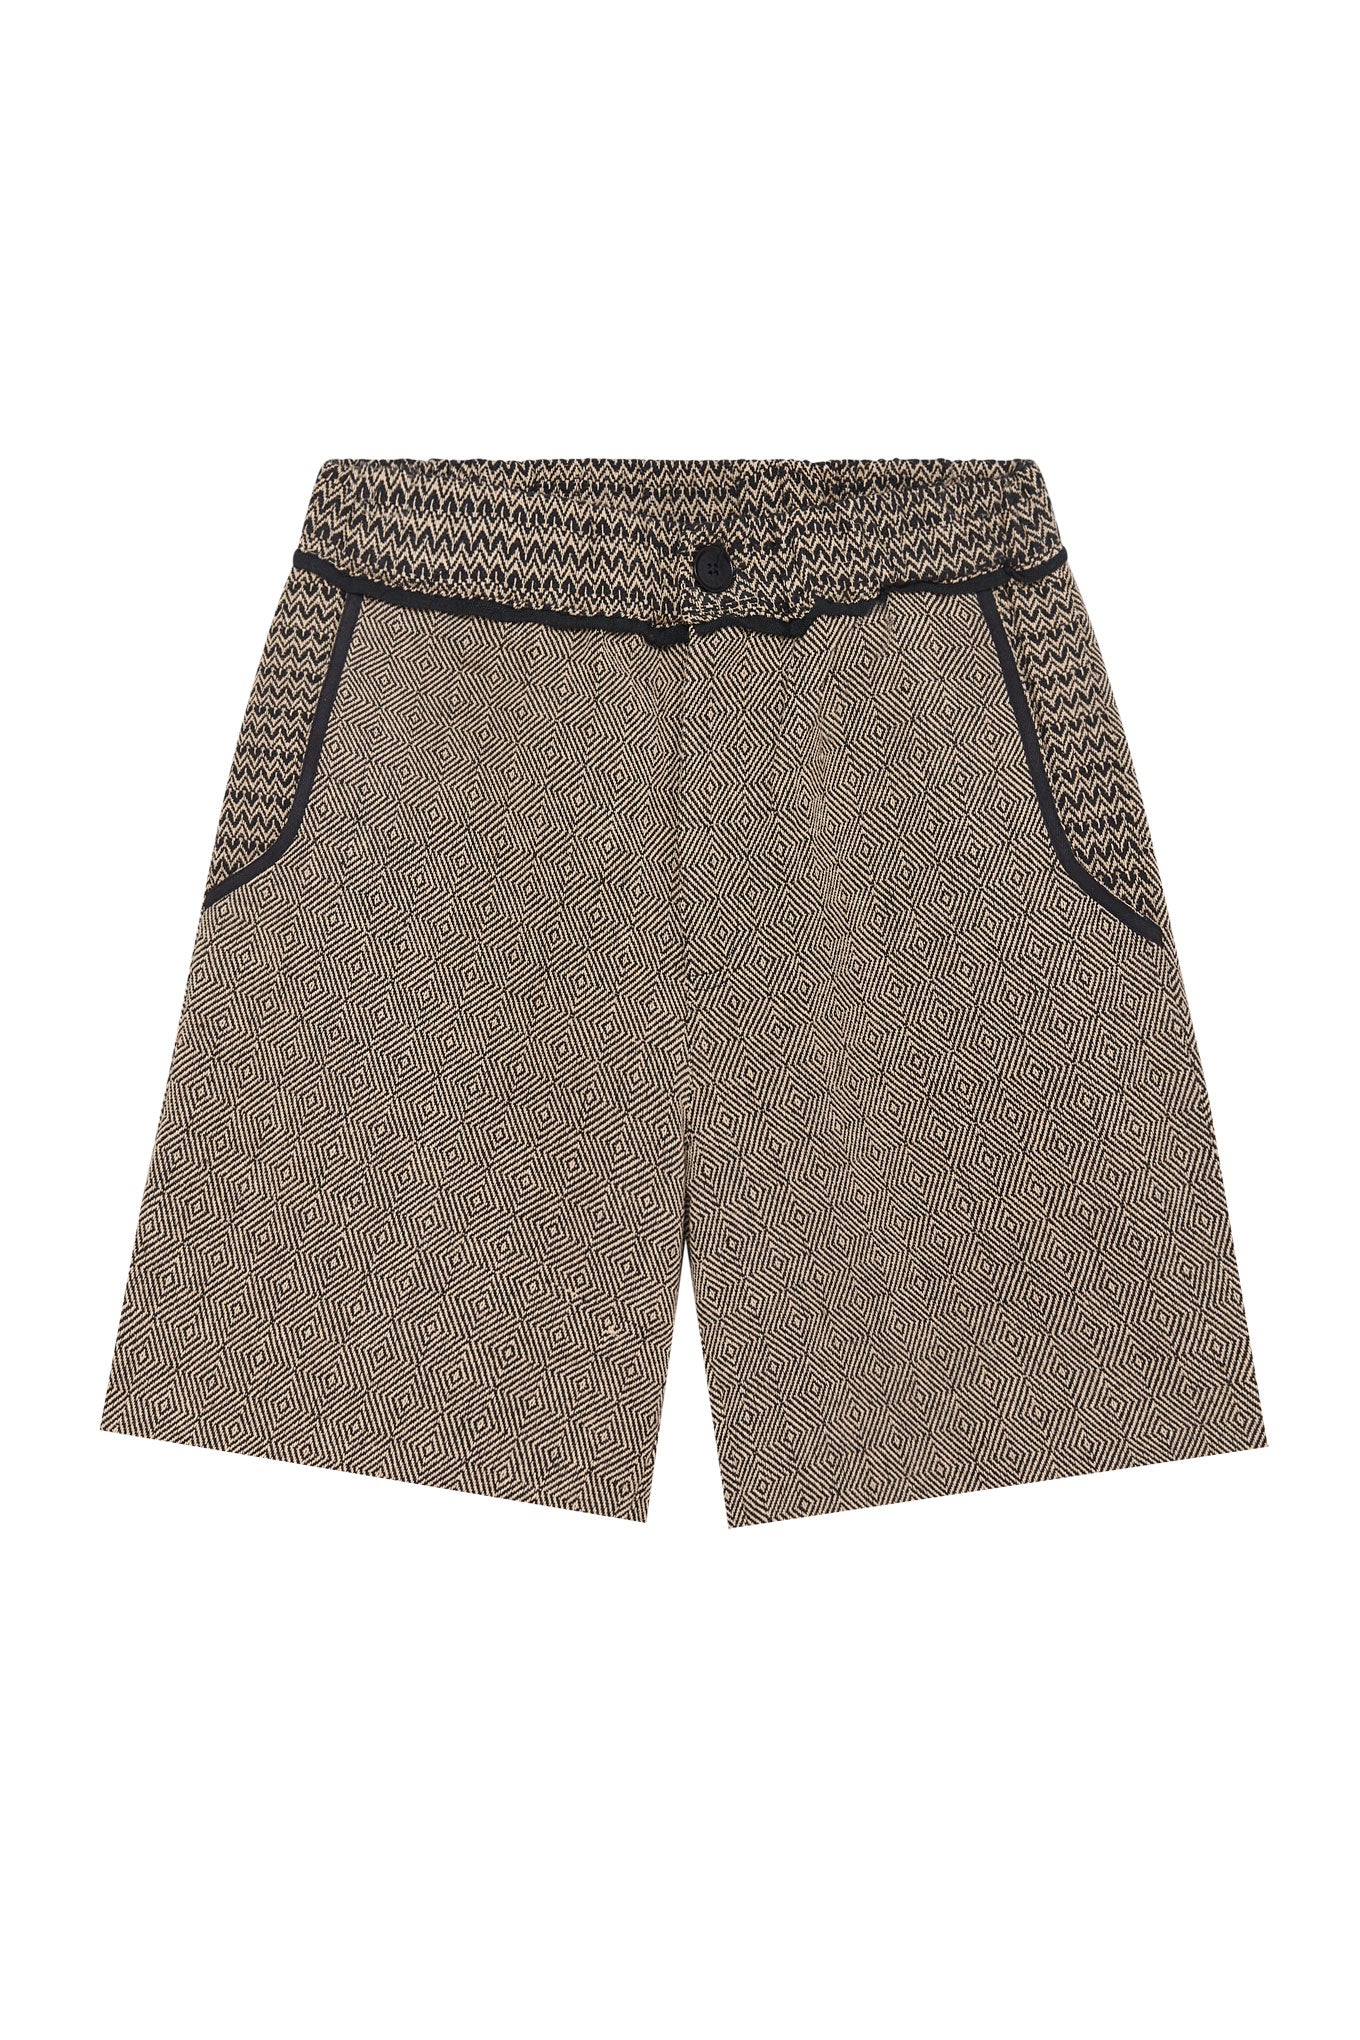 JOEY - Hand Loomed Cotton Patchwork Shorts